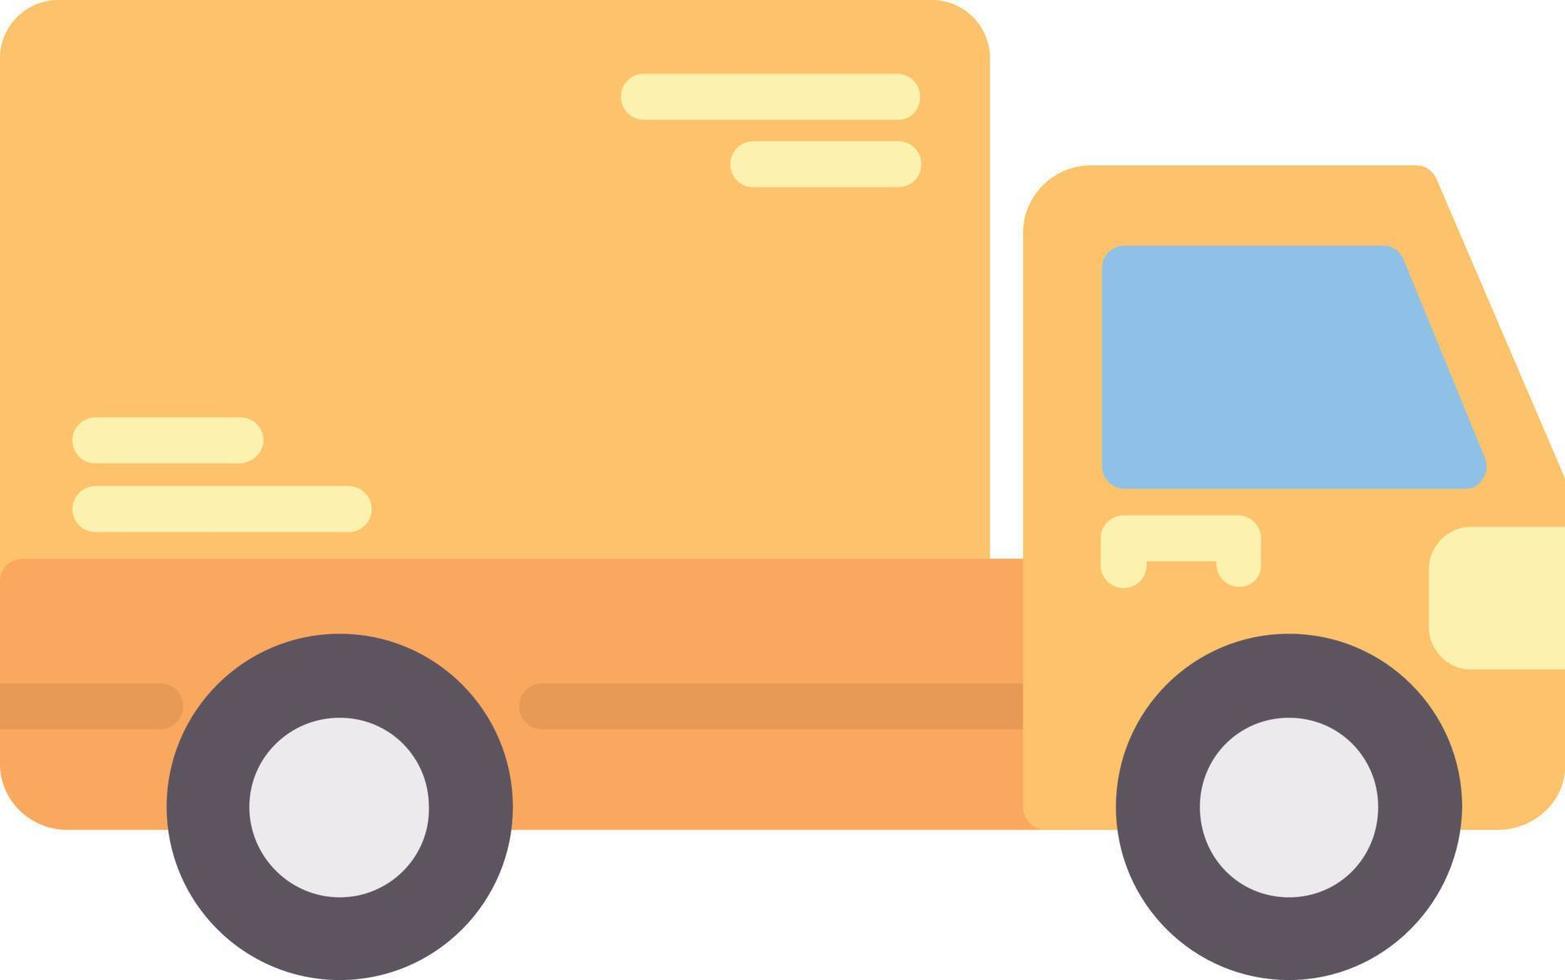 Delivery Truck Flat Icon vector